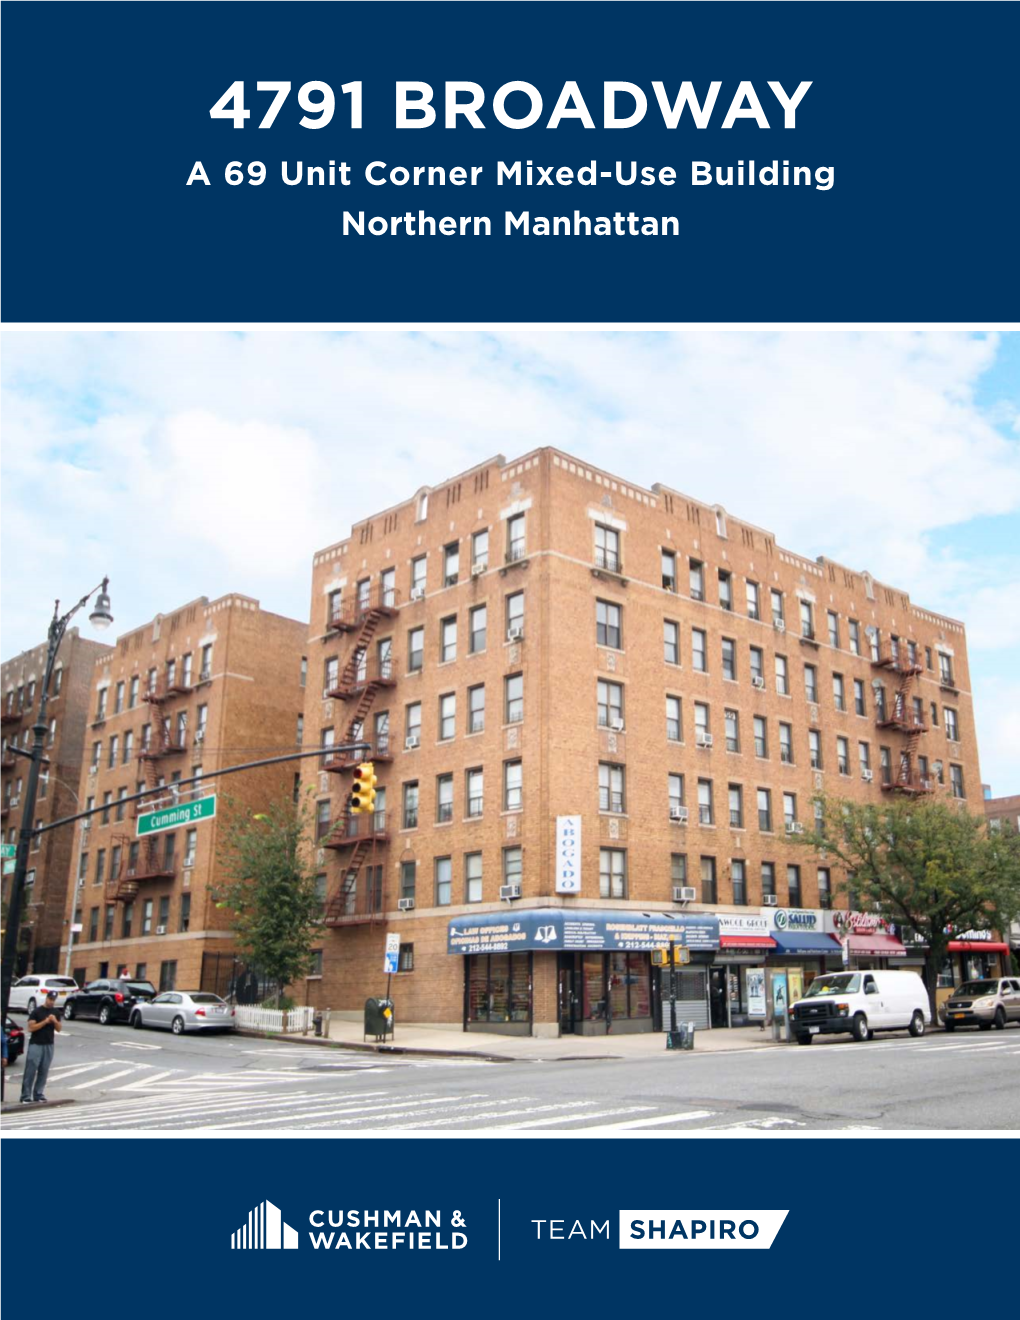 4791 BROADWAY a 69 Unit Corner Mixed-Use Building Northern Manhattan 4791 BROADWAY - PROPERTY OVERVIEW